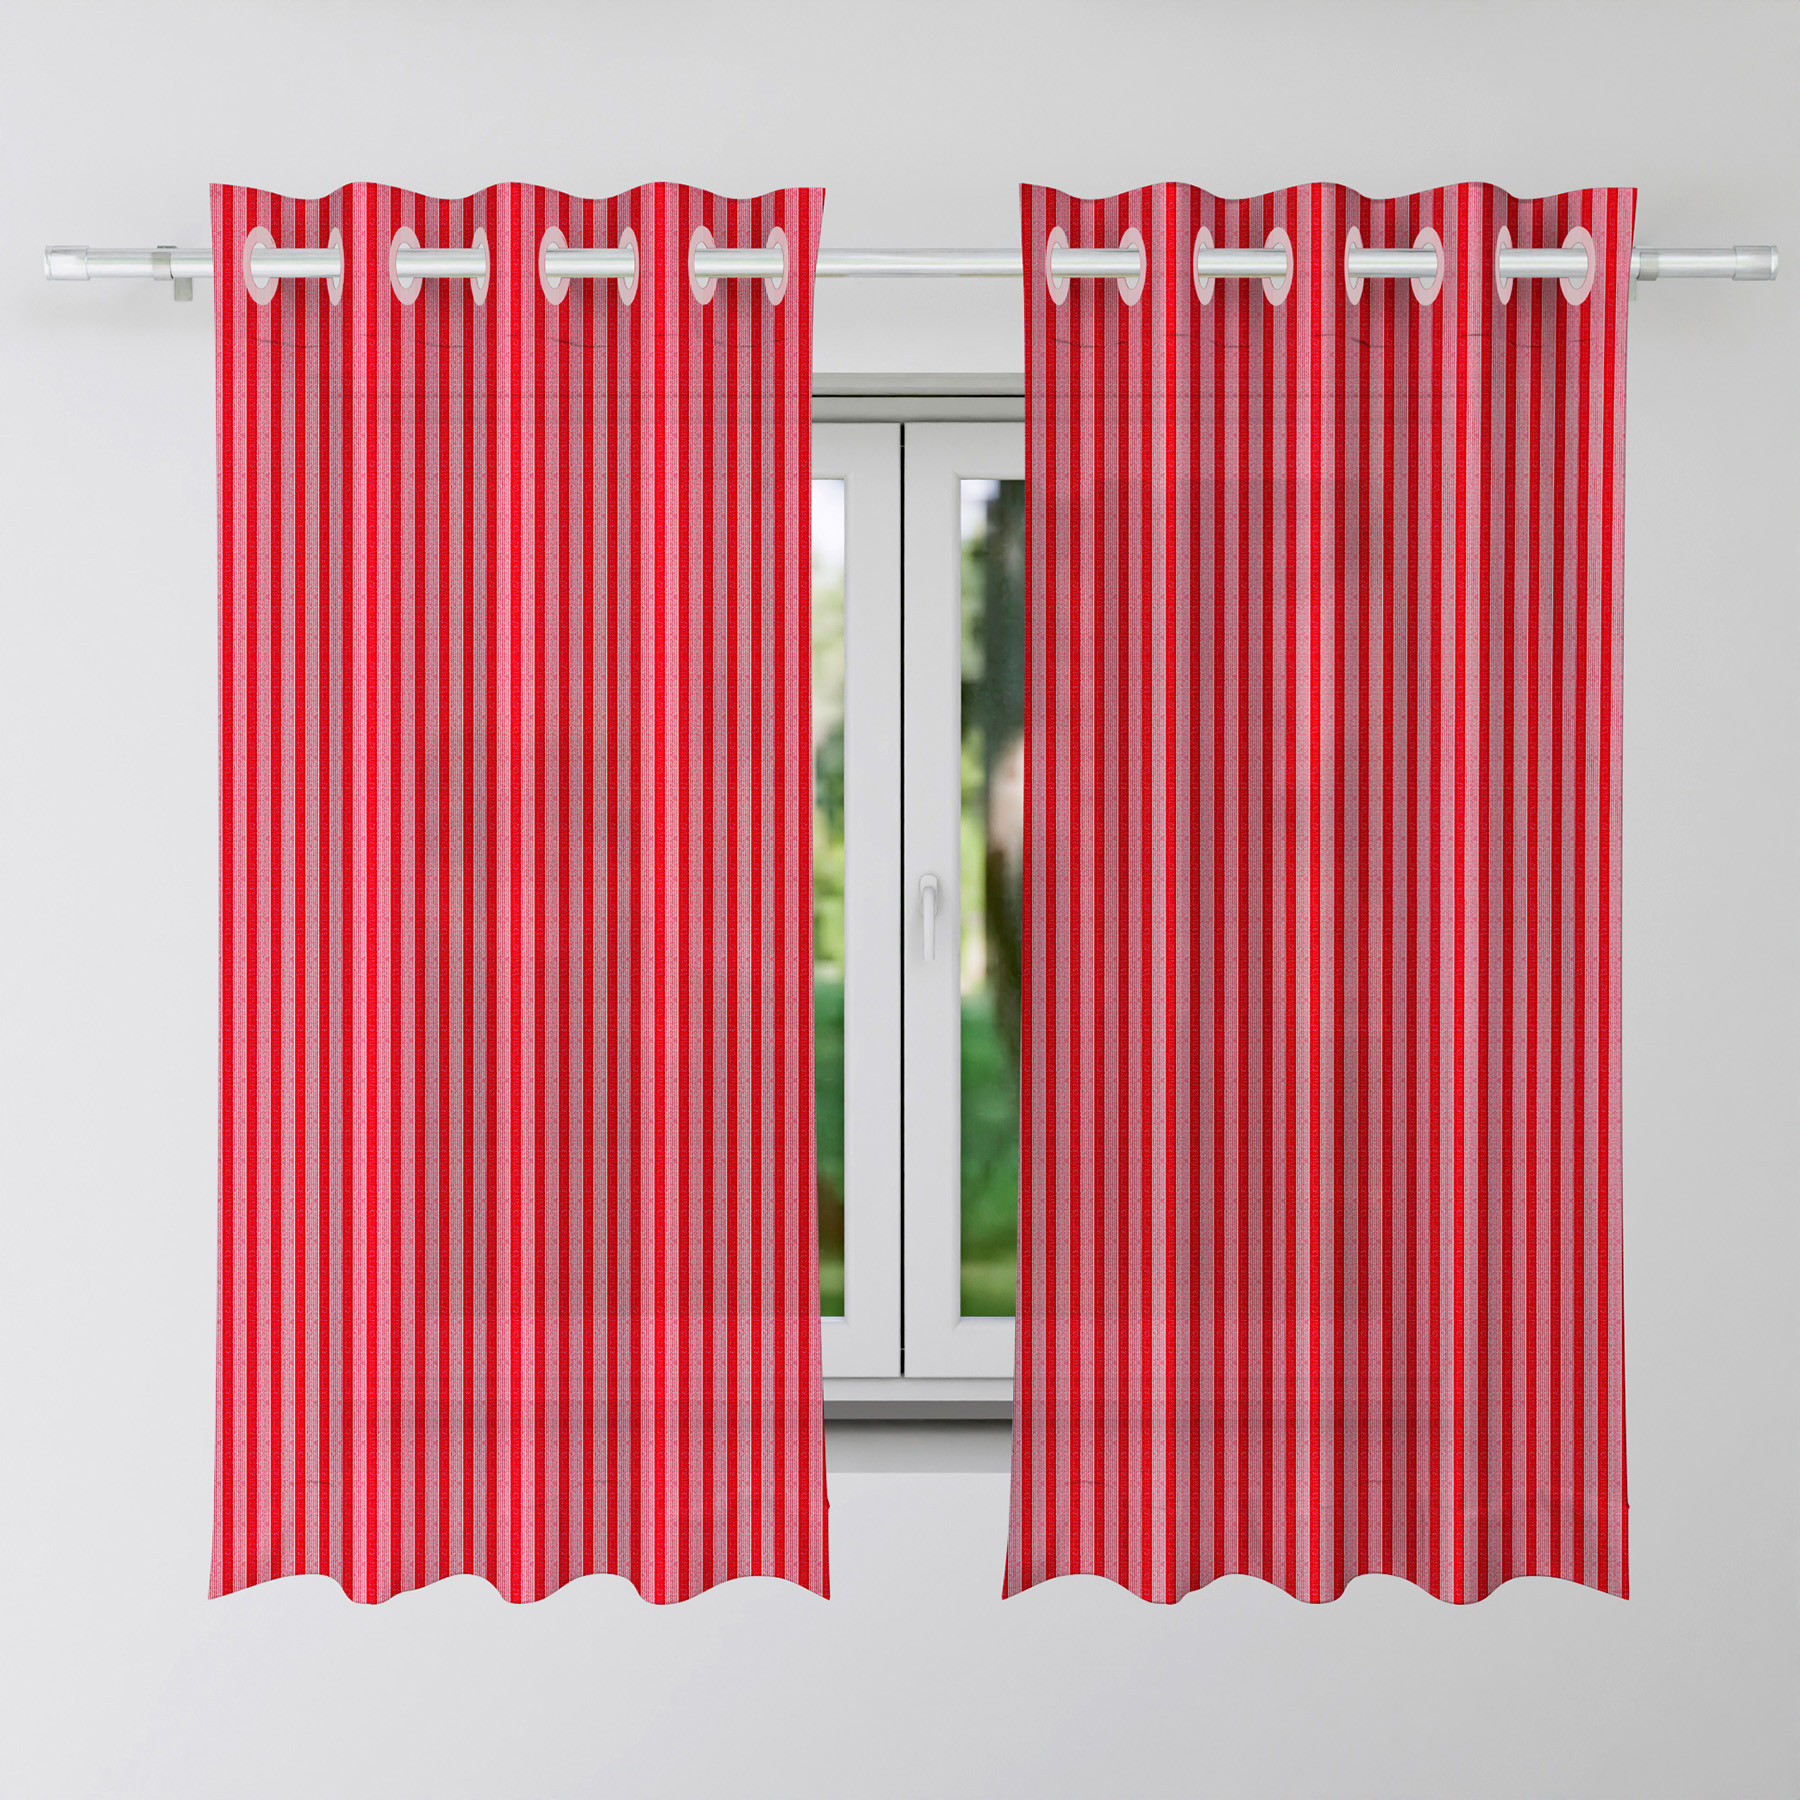 Kuber Industries Window Curtain | Sheer Window Curtains | Parda for Living Room | Drapes for Bedroom | Window Curtain Parda for Home Décor | Lining Net | 5 Feet | Maroon